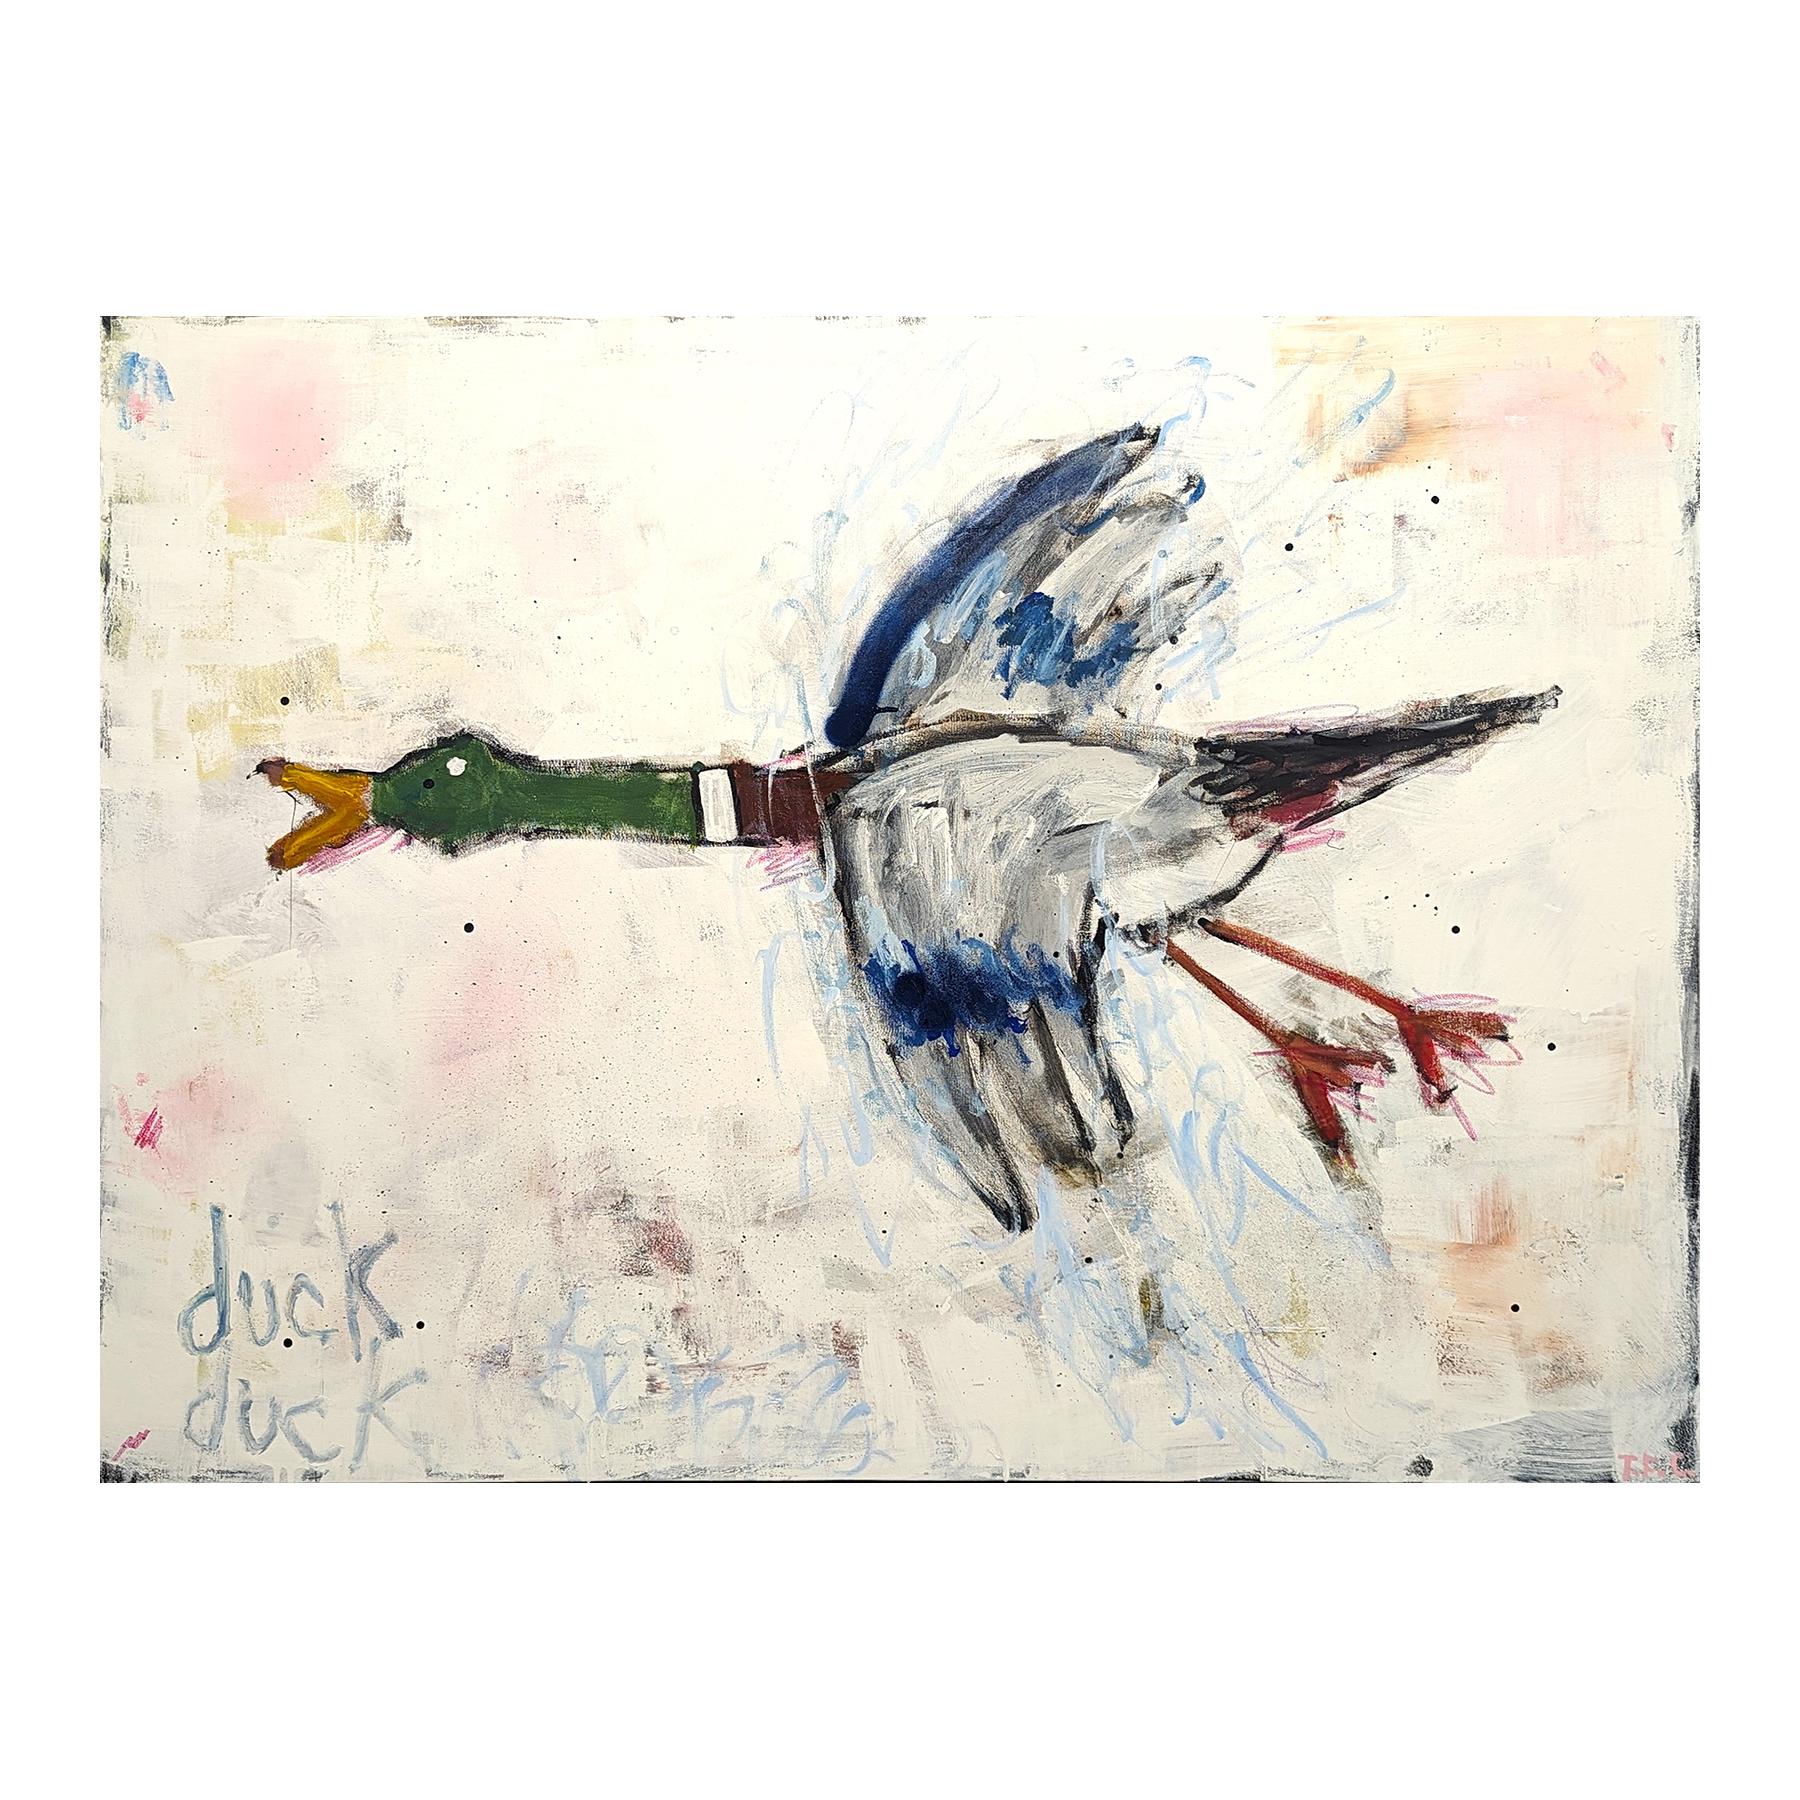 Abstract animal painting by contemporary artist Tyler Casey. The work features a gestural depiction of a duck against an off-white background. Signed in the front lower right corner. 

Artist Biography: Tyler Casey is a self-taught diverse artist